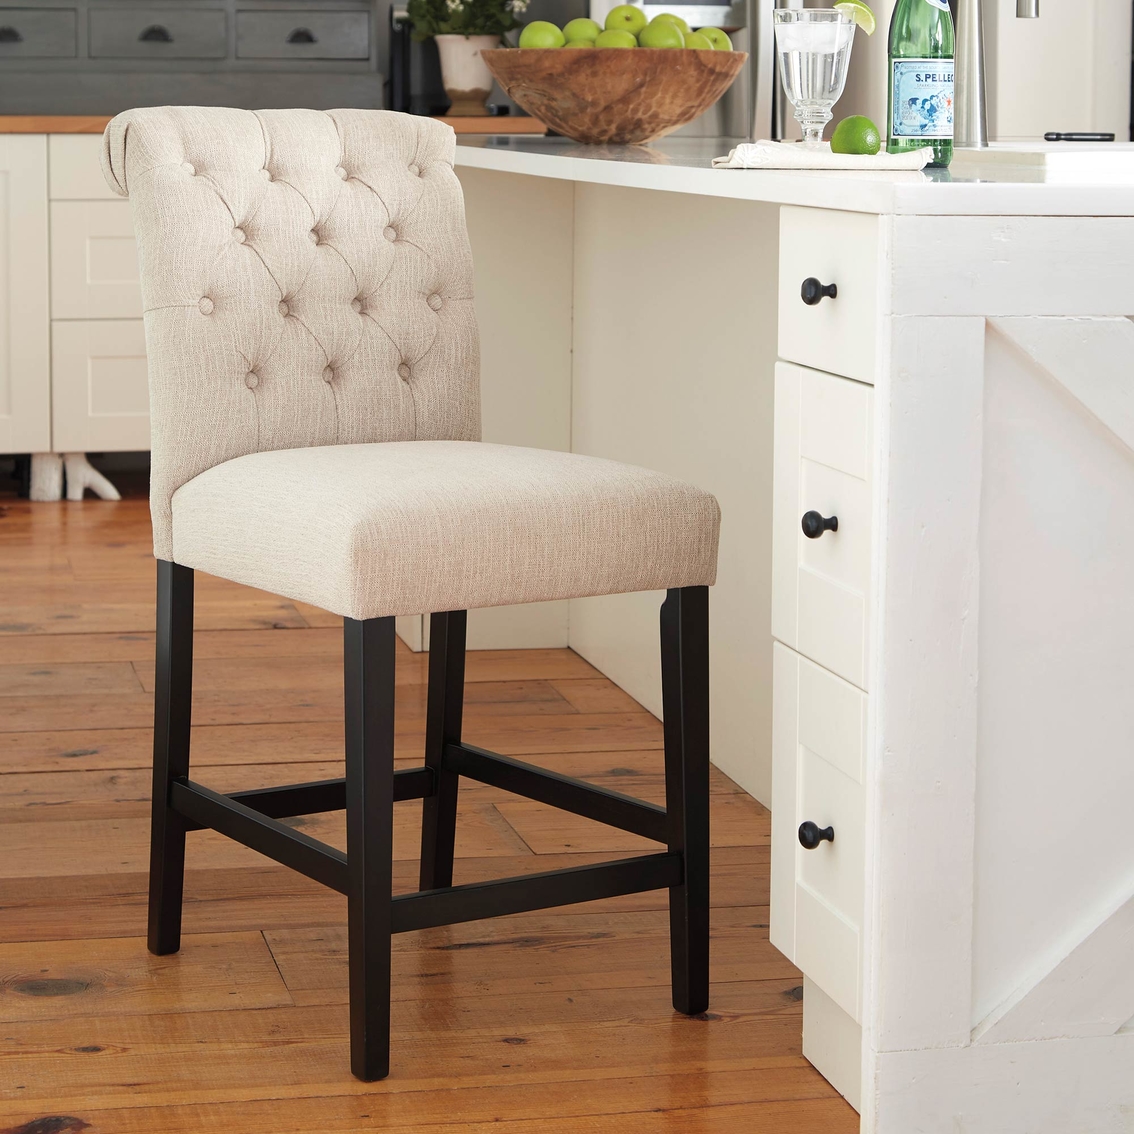 Signature Design by Ashley Tripton Upholstered Counter Stool 2 Pk. - Image 3 of 3